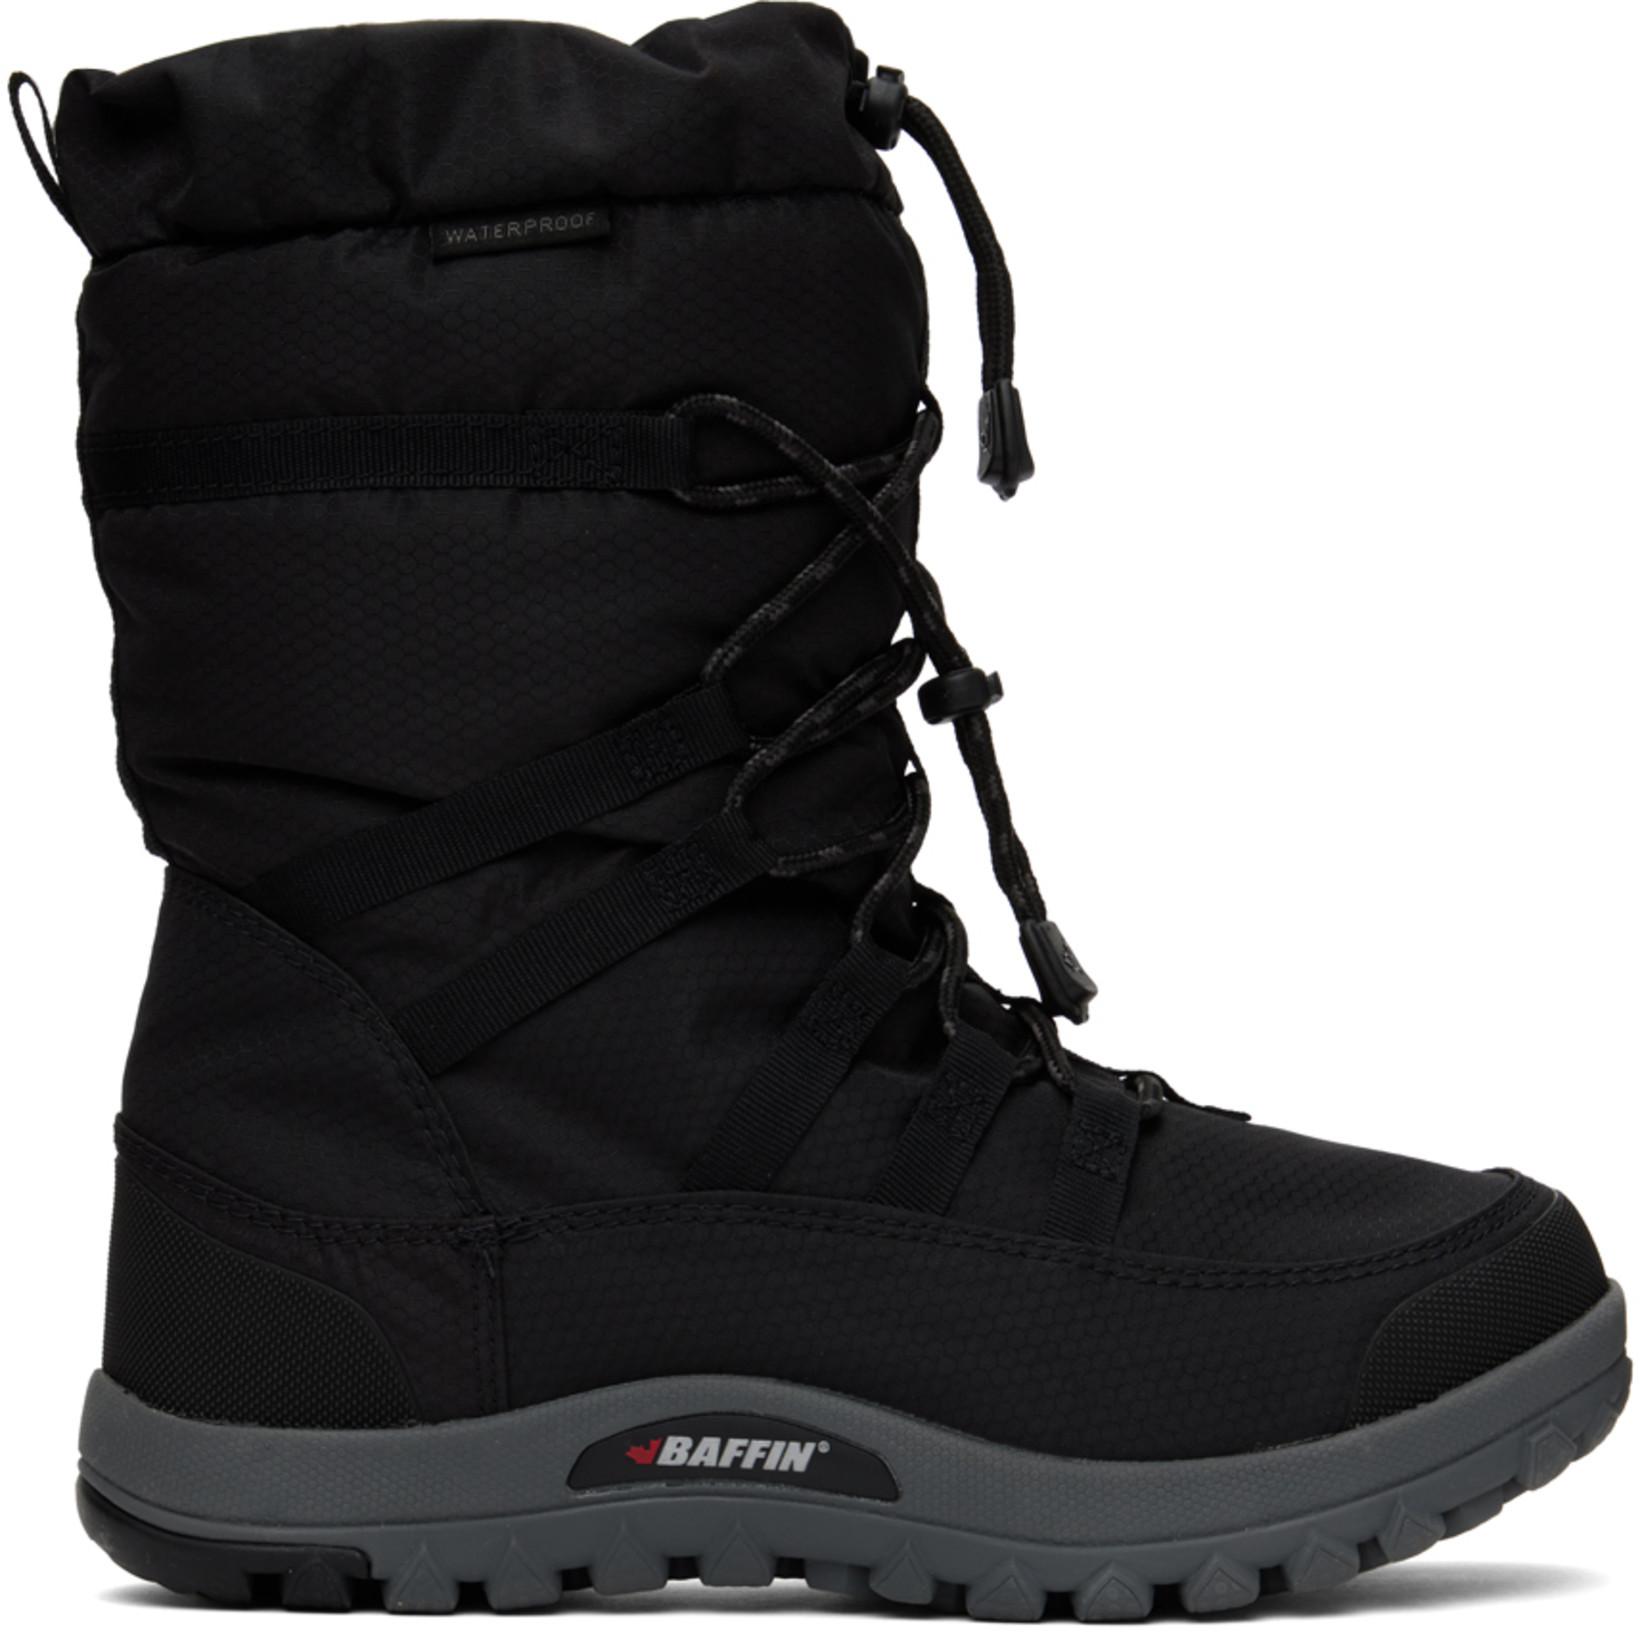 Black Escalate Boots by BAFFIN